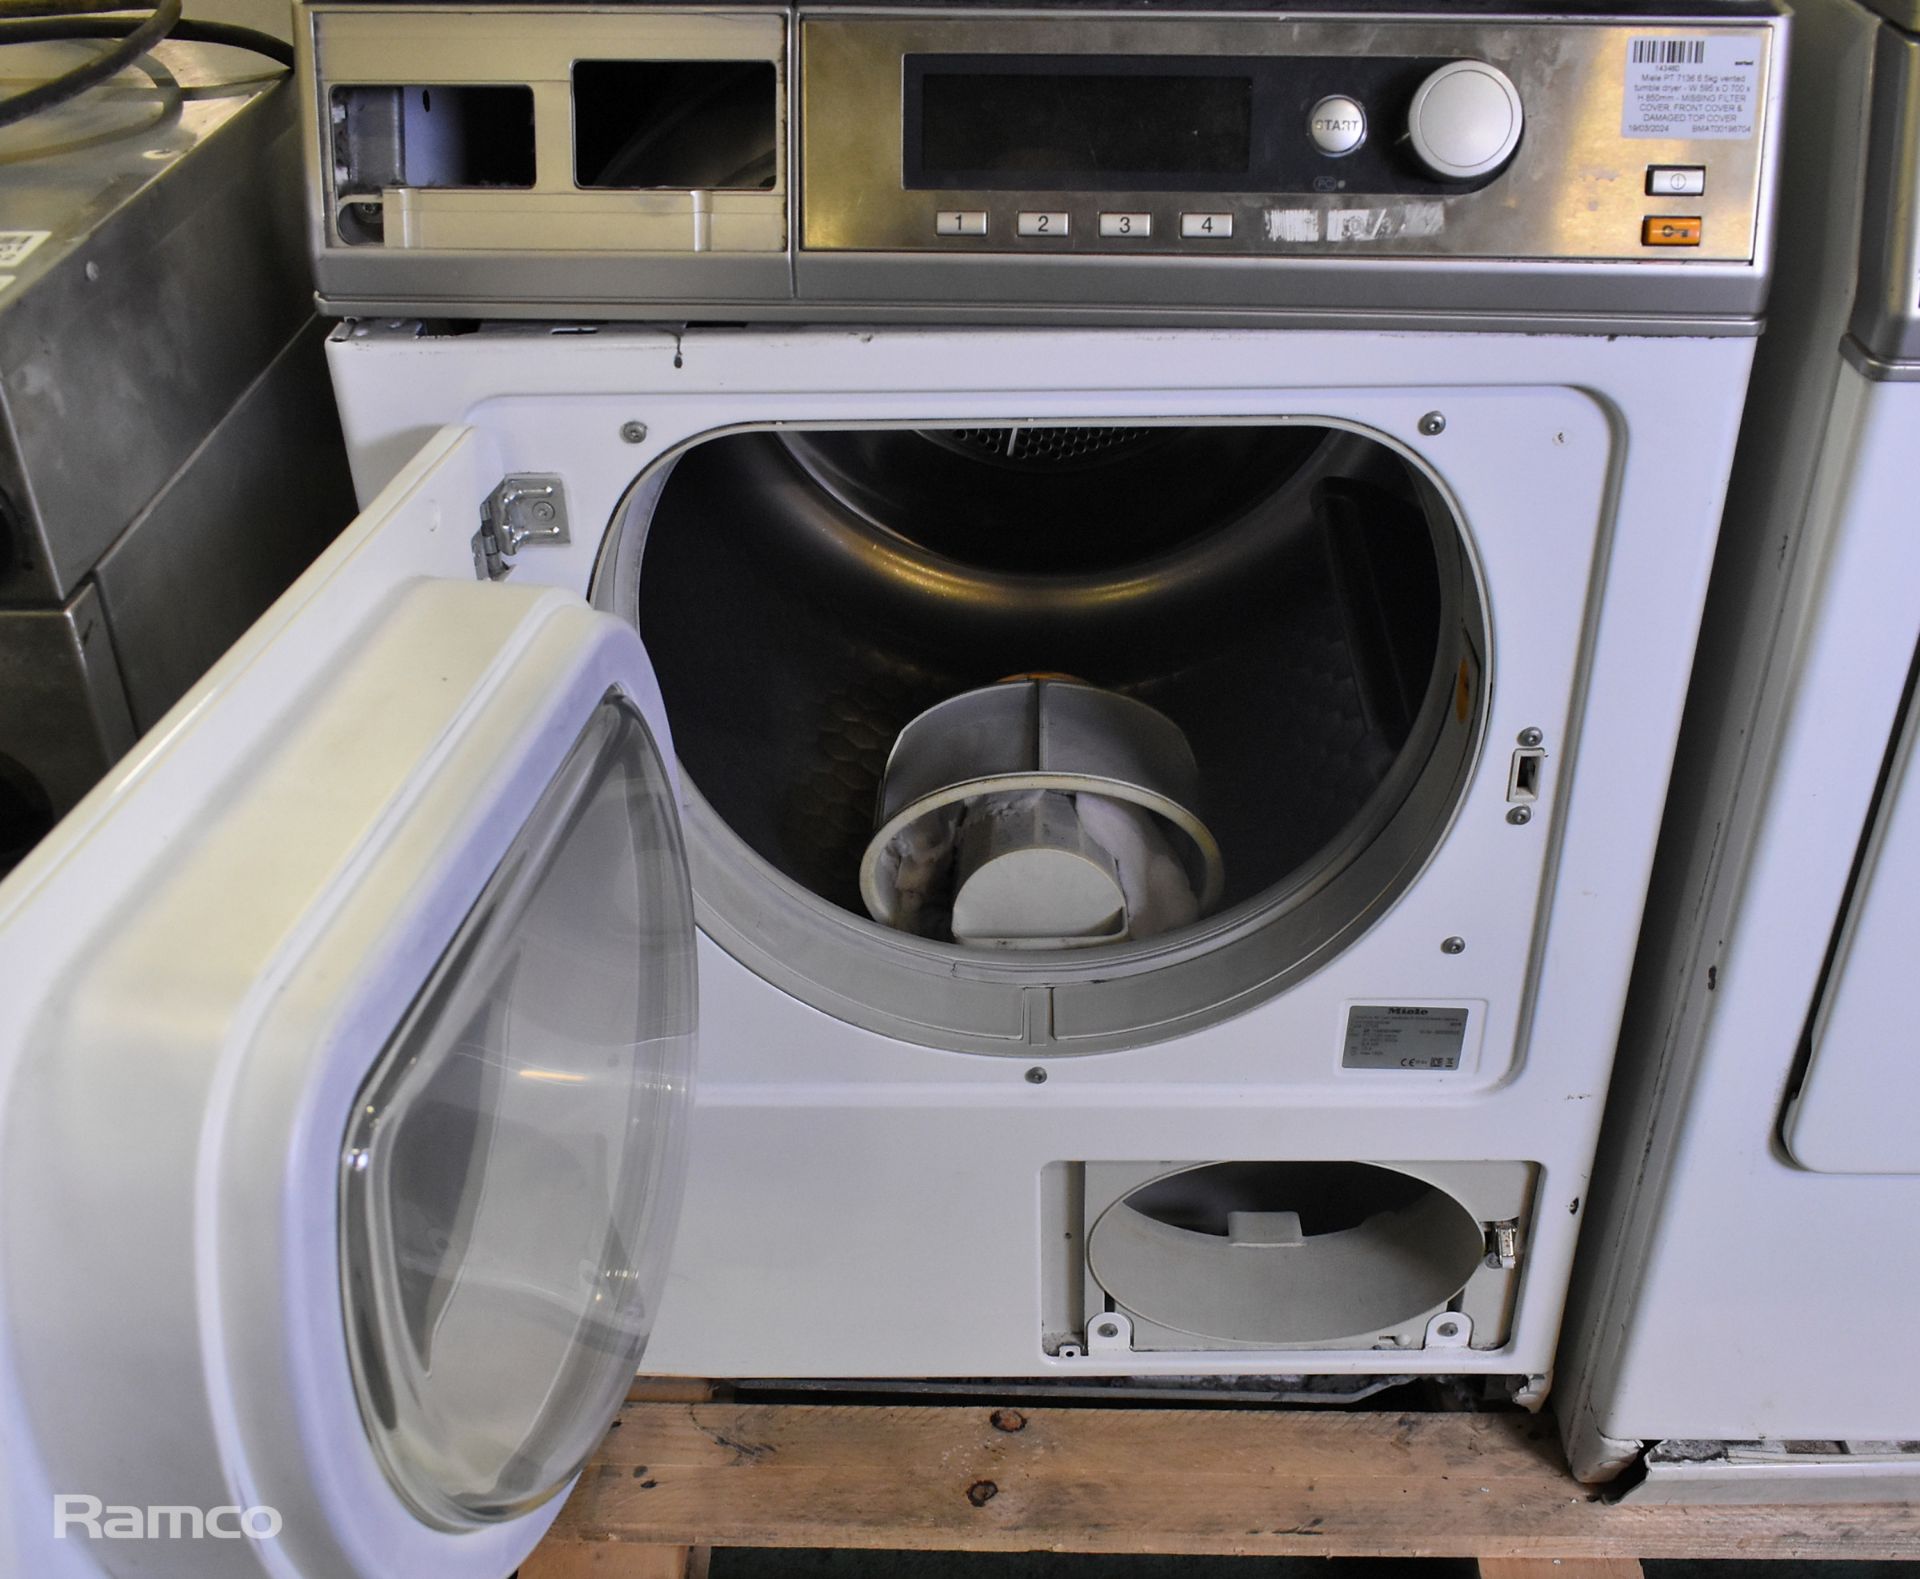 Miele PT 7136 6.5kg vented tumble dryer - W 595 x D 700 x H 850mm - MISSING FILTER COVER - Image 3 of 5